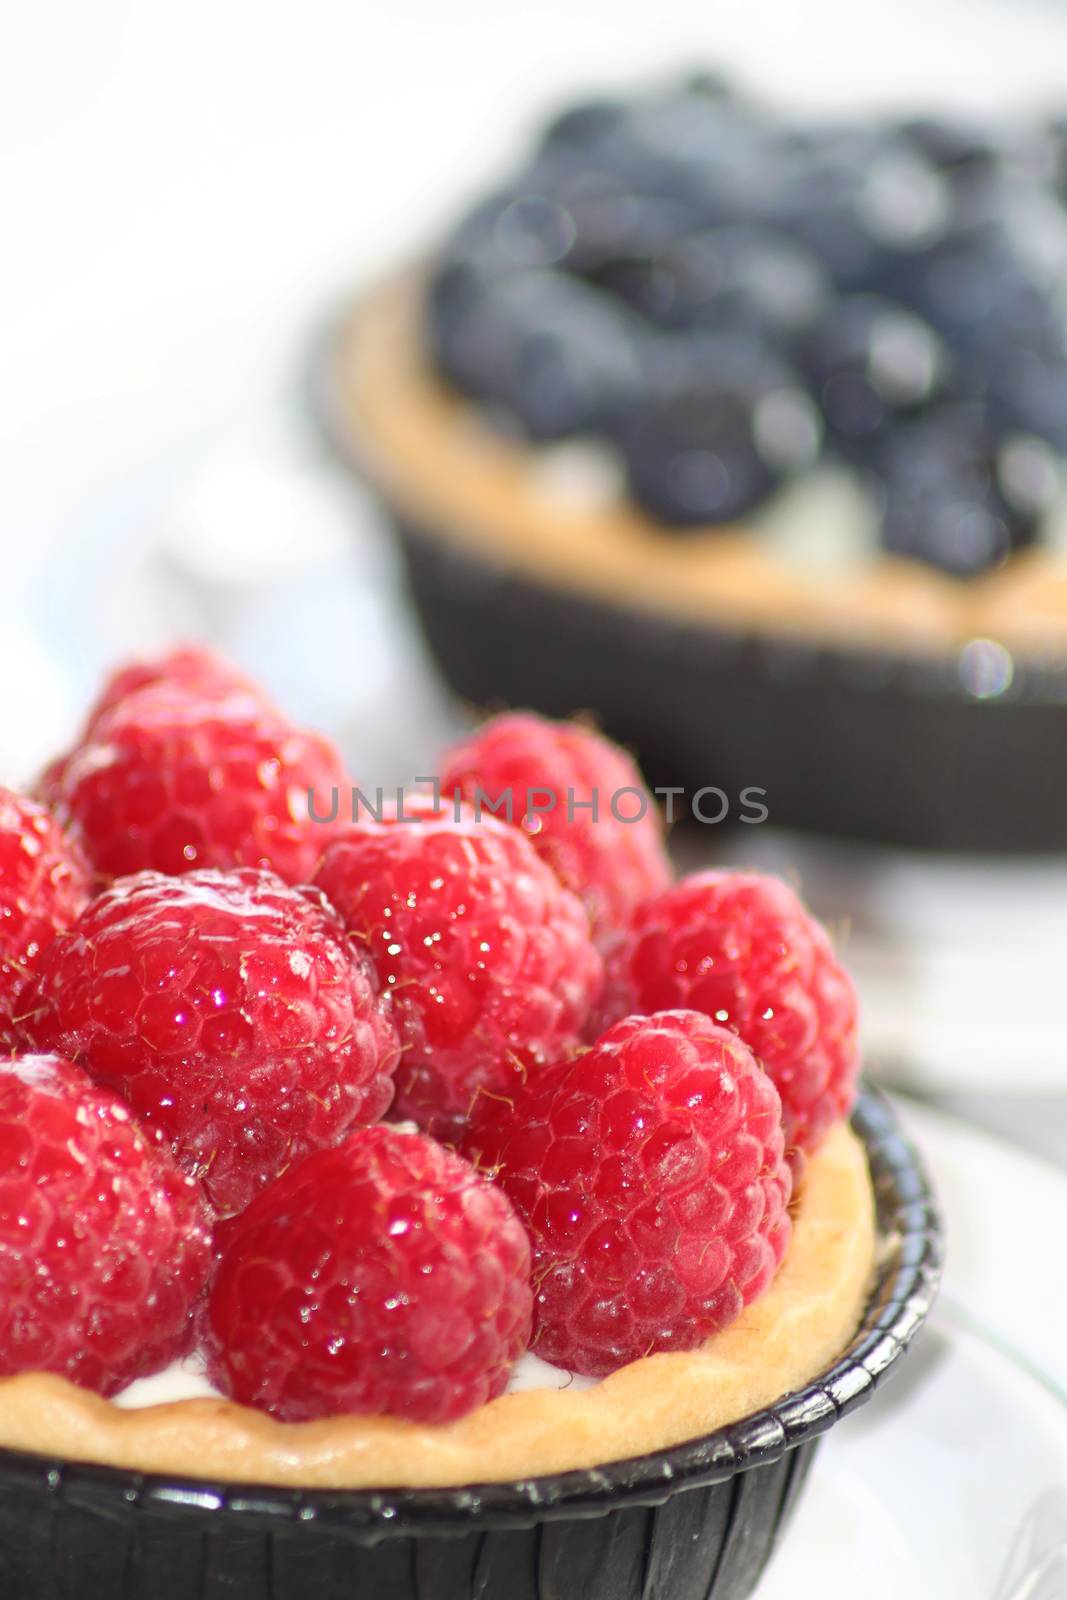 Cupcakes with raspberries and berries.